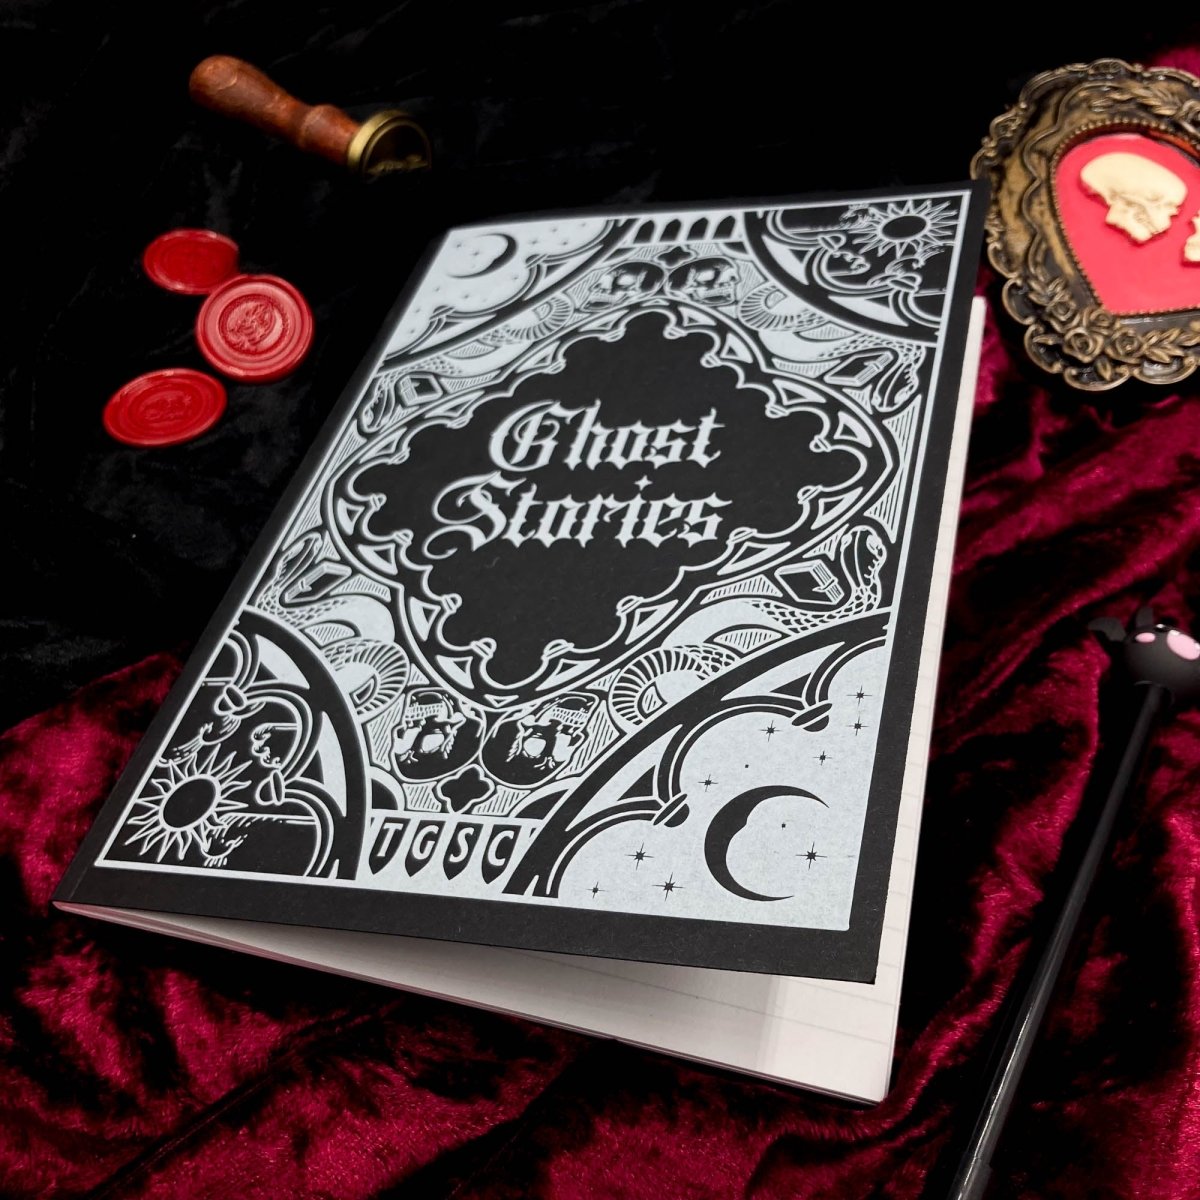 Ghost Stories Vintage Style Gothic Notebook - The Gothic Stationery Company -